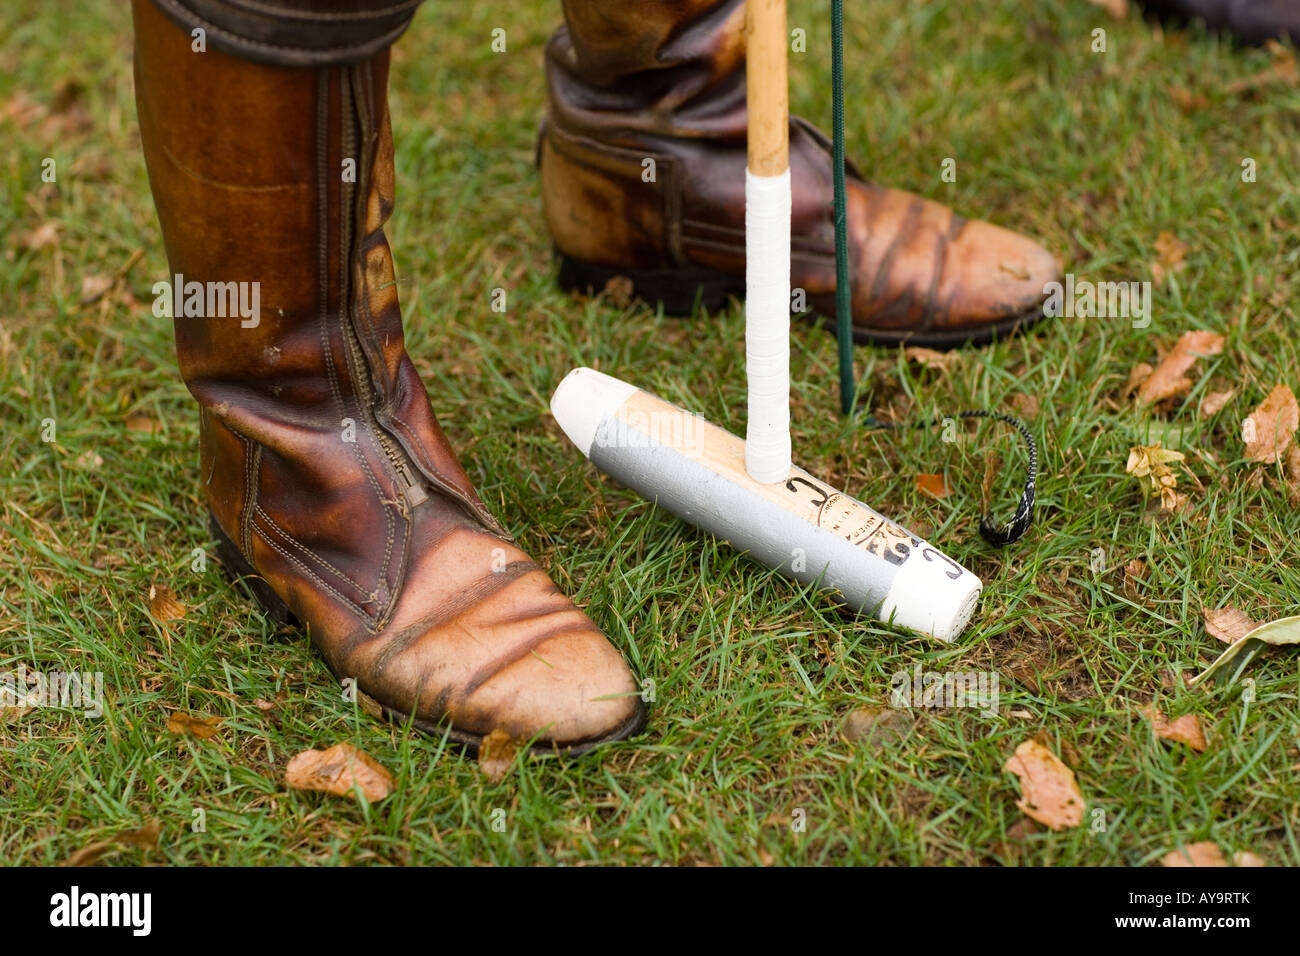 Polo mallet and feet Stock Photo